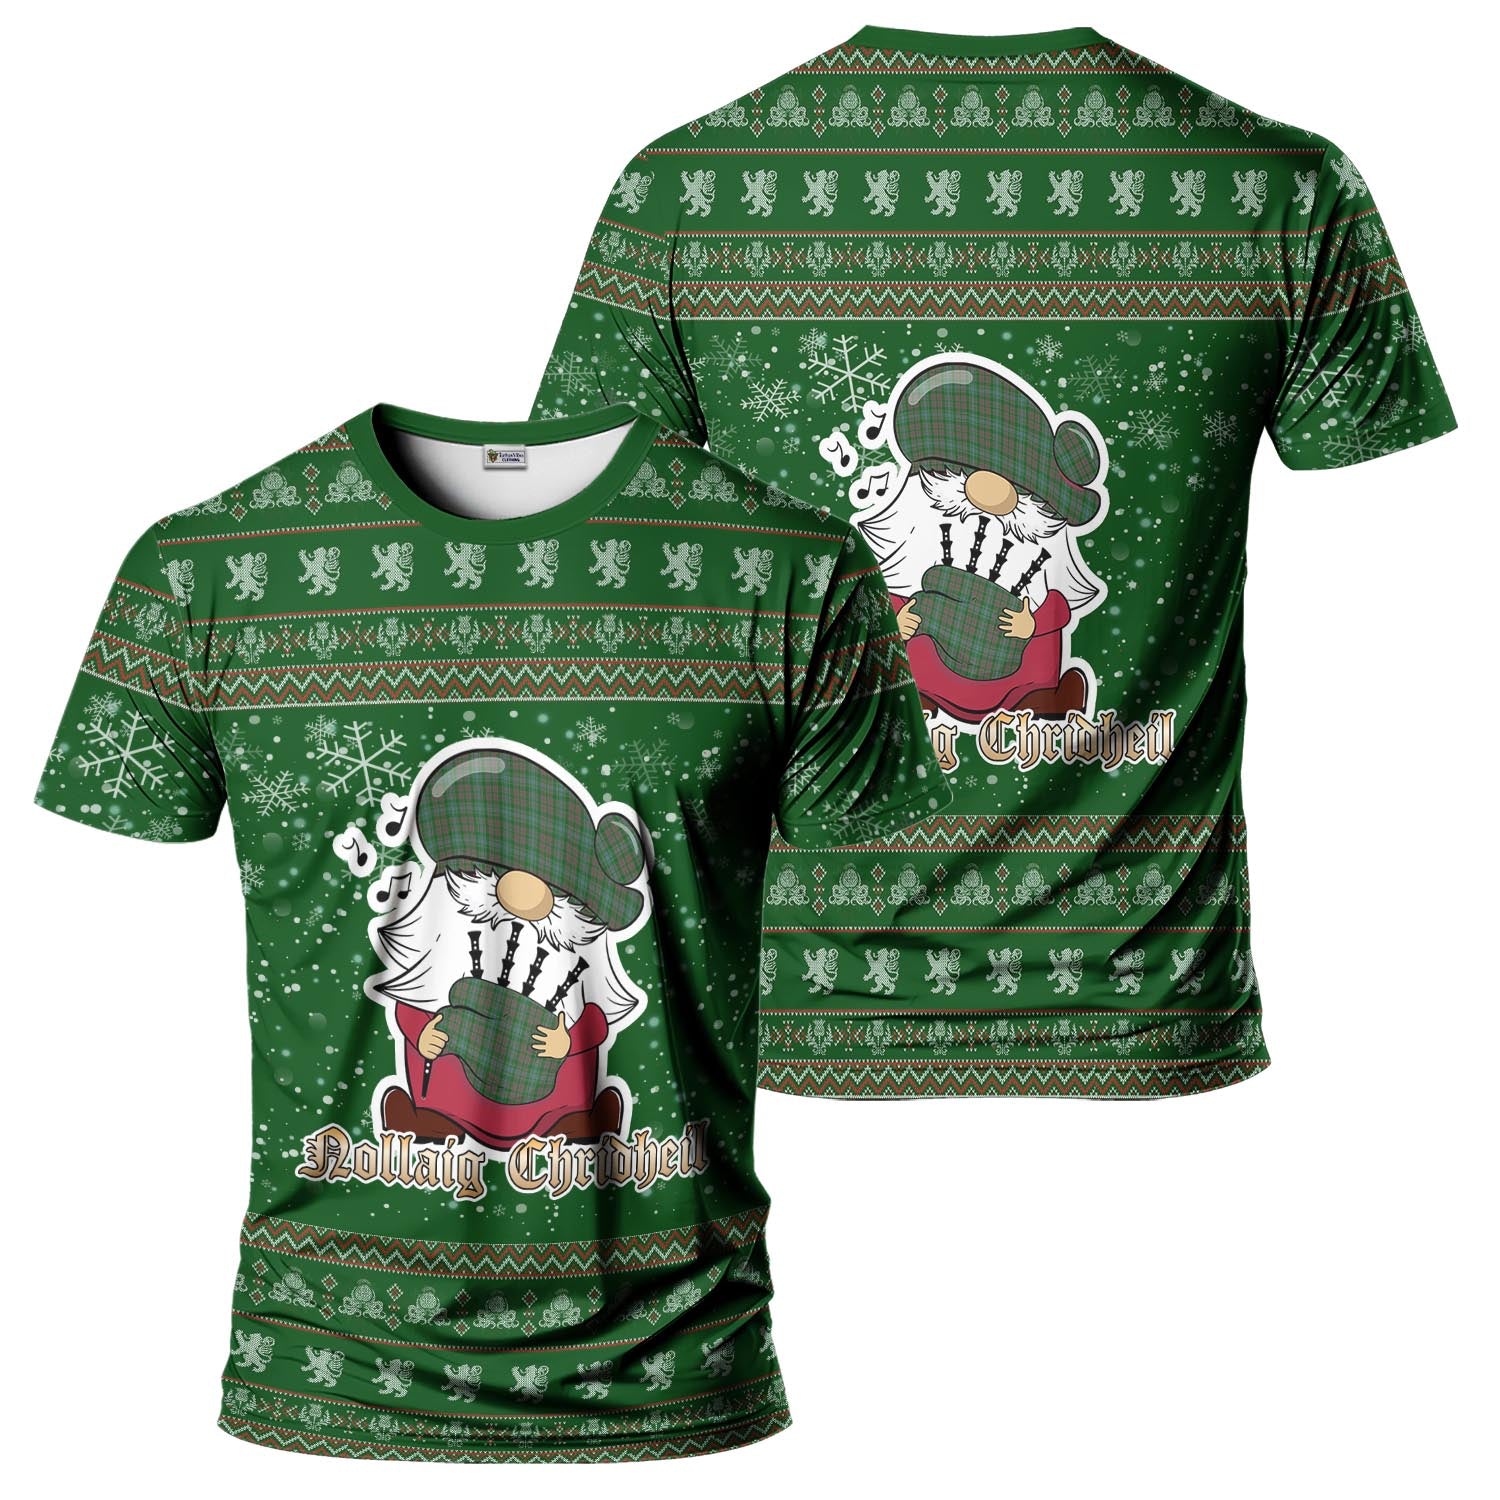 Ralston USA Clan Christmas Family T-Shirt with Funny Gnome Playing Bagpipes Men's Shirt Green - Tartanvibesclothing